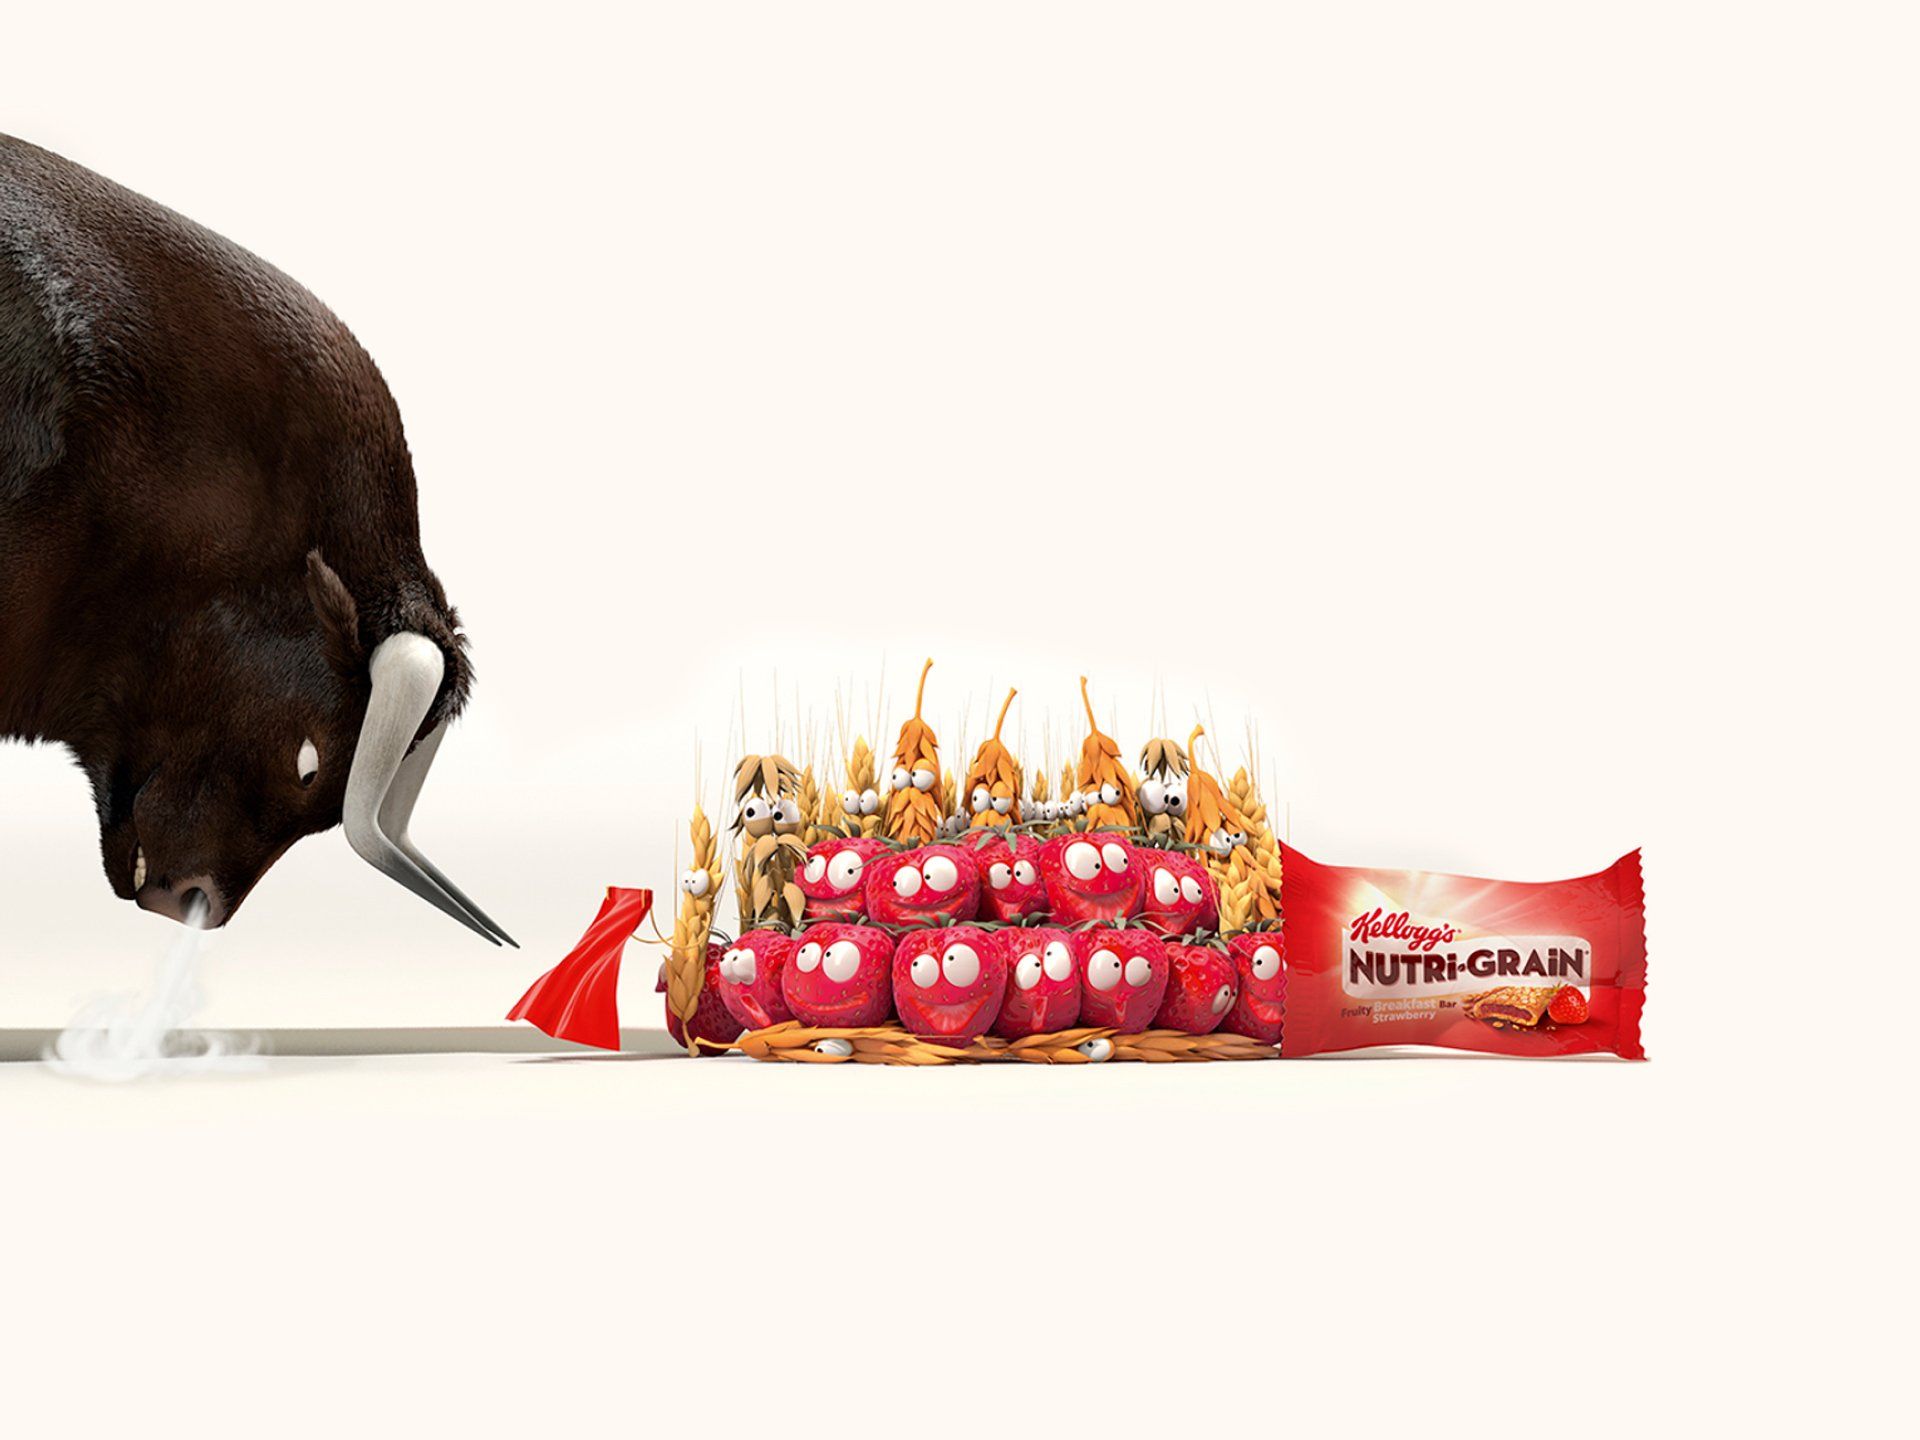 Ad execution featuring a bull that is about to ram some animated ingredients into a Kellogg's Nutri-grain wrapper. © The Animo Group Ltd.